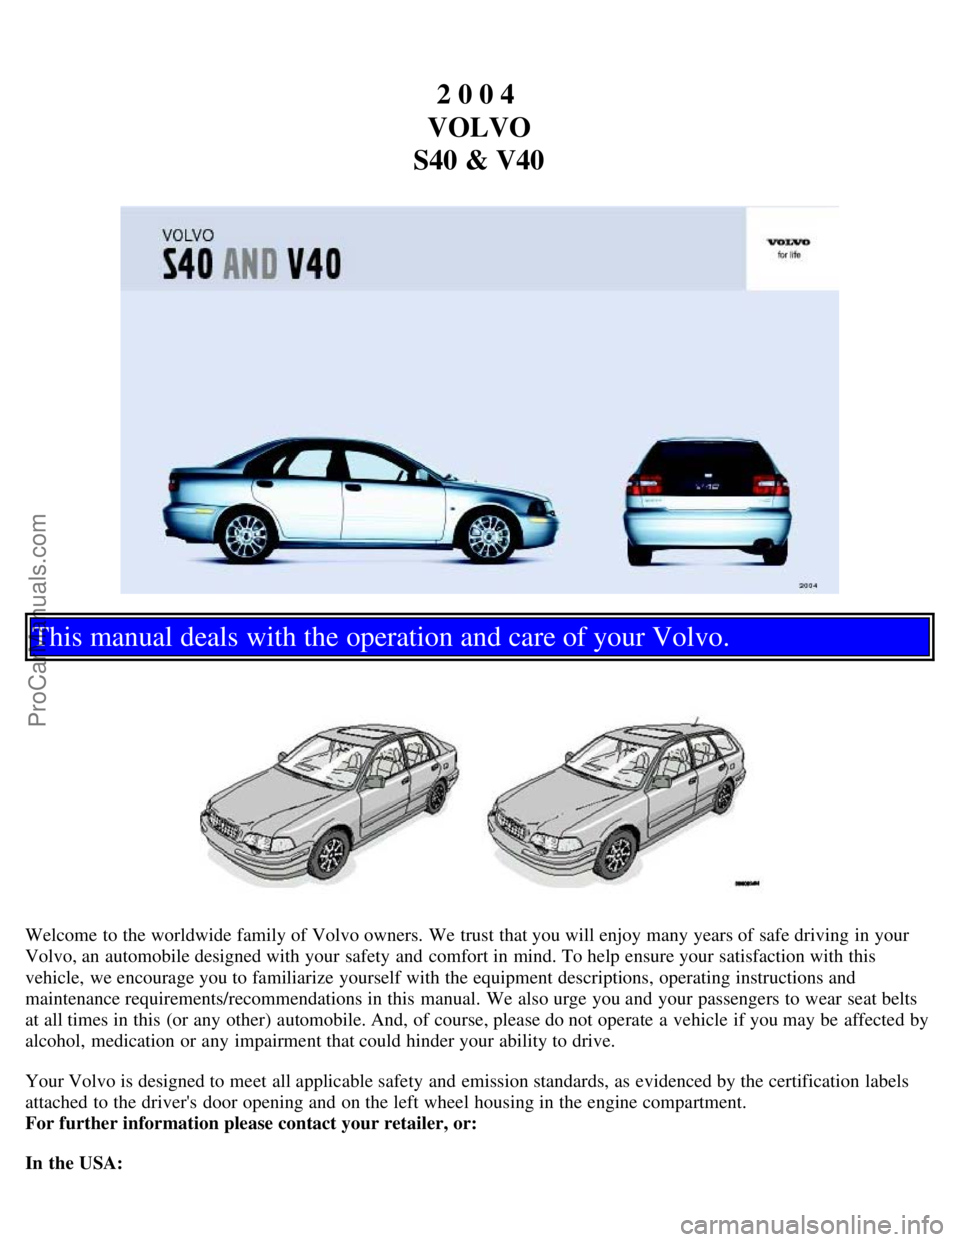 VOLVO V4 2004  Owners Manual 2 0 0 4 
VOLVO
S40 & V40
This manual deals with the operation and care of your Volvo.
Welcome to the worldwide family of Volvo owners. We trust that you will enjoy many years of safe driving in your
V